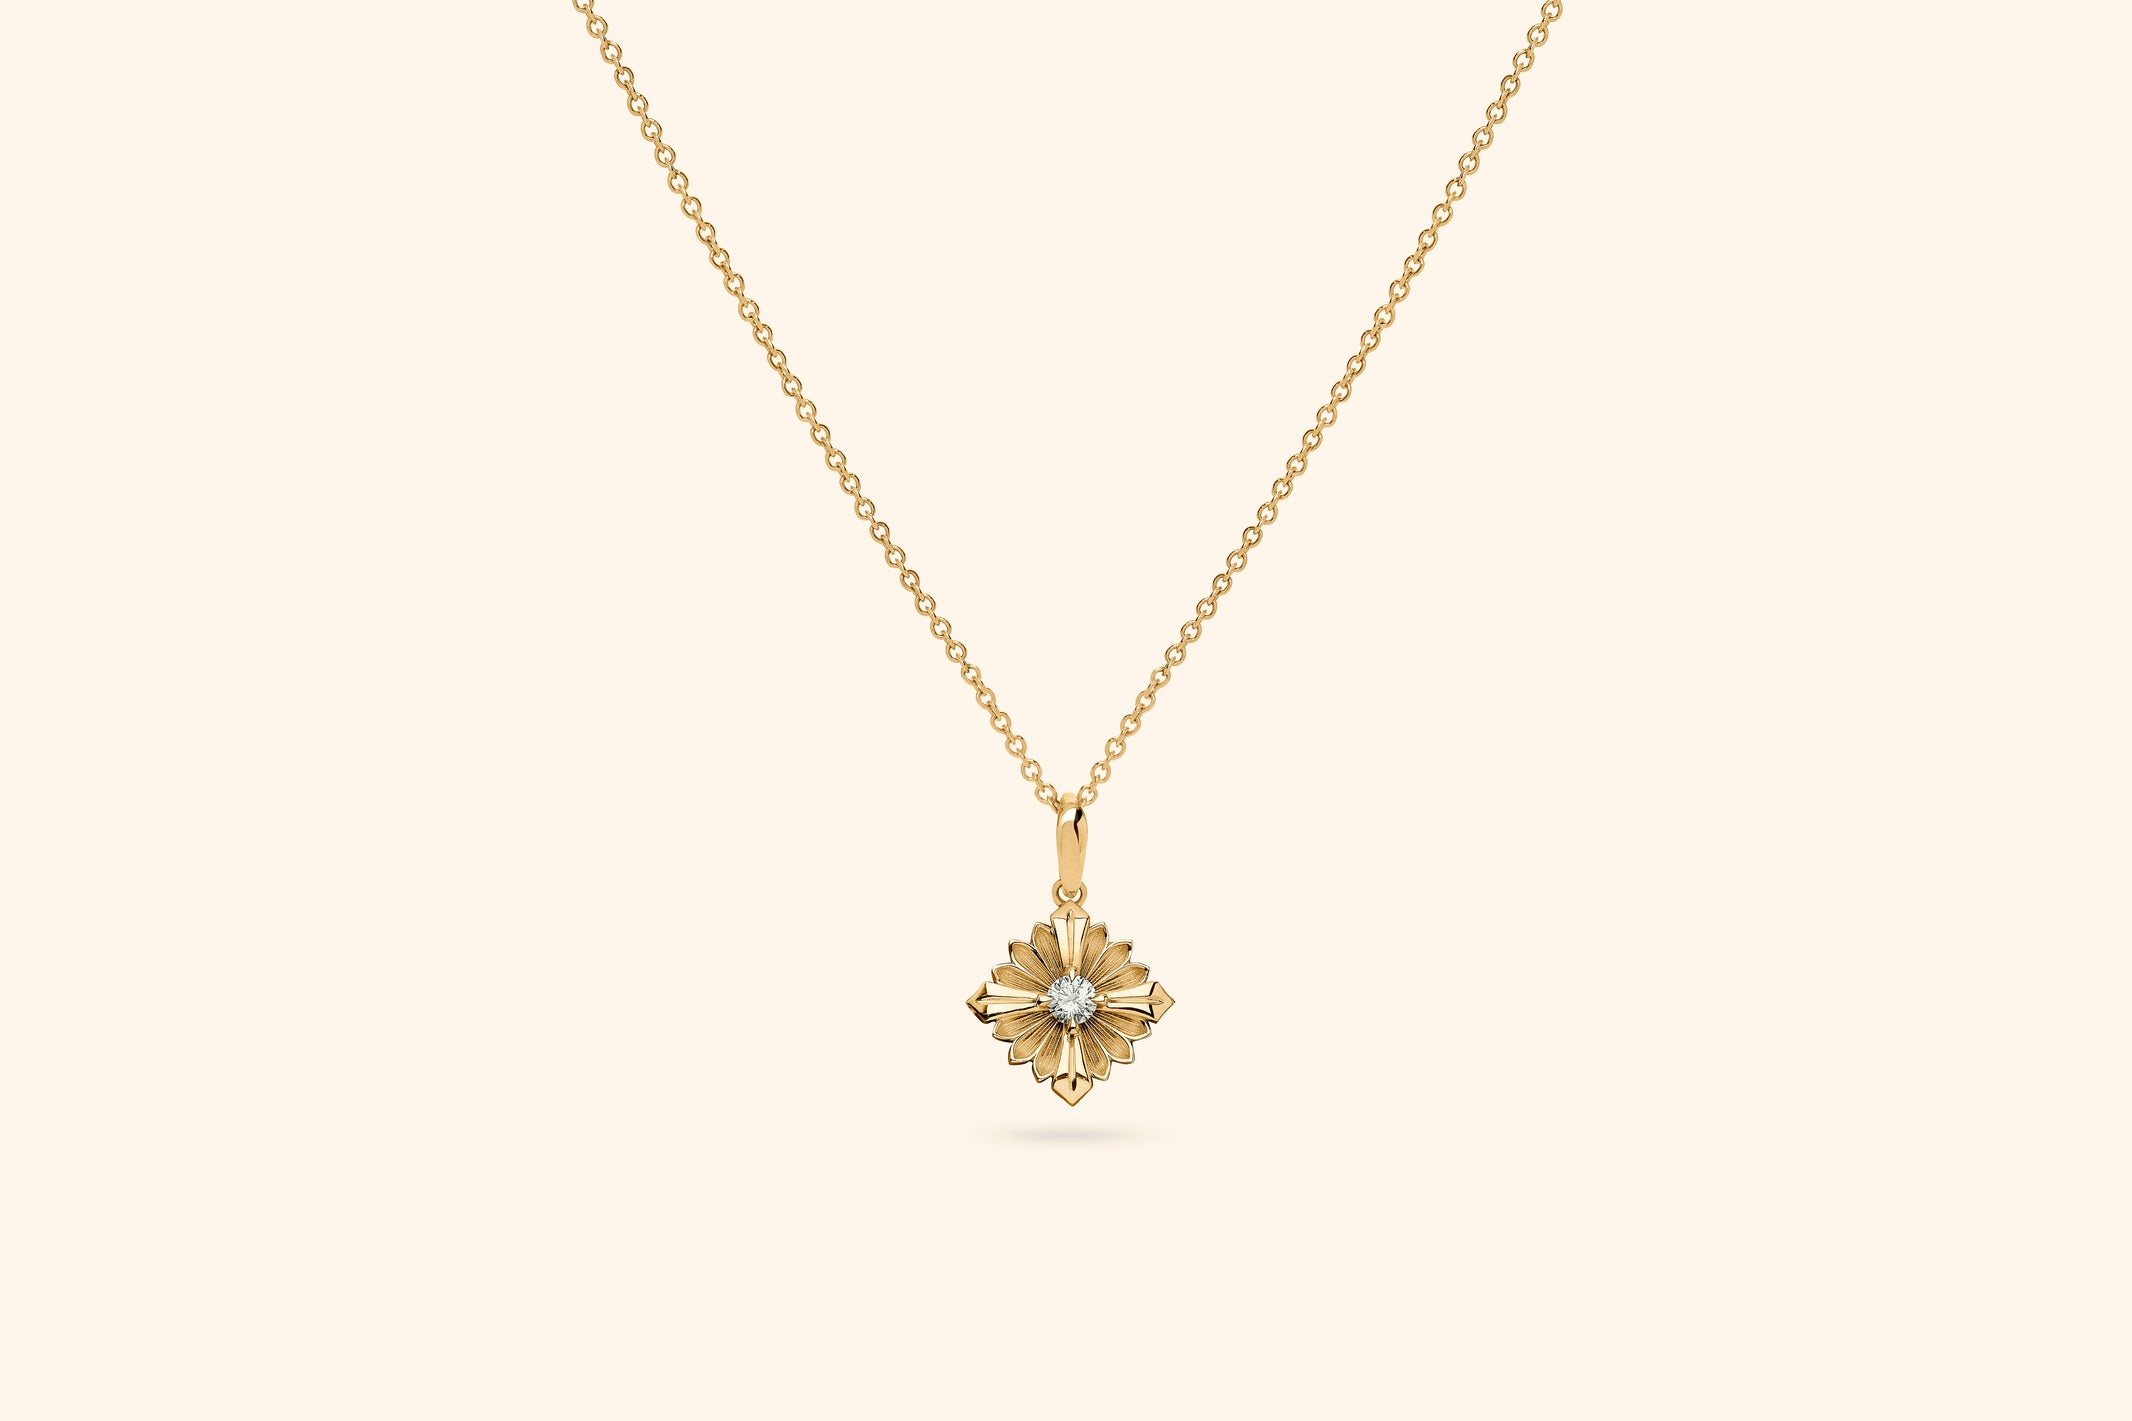 Stamp necklace, yellow gold, diamond